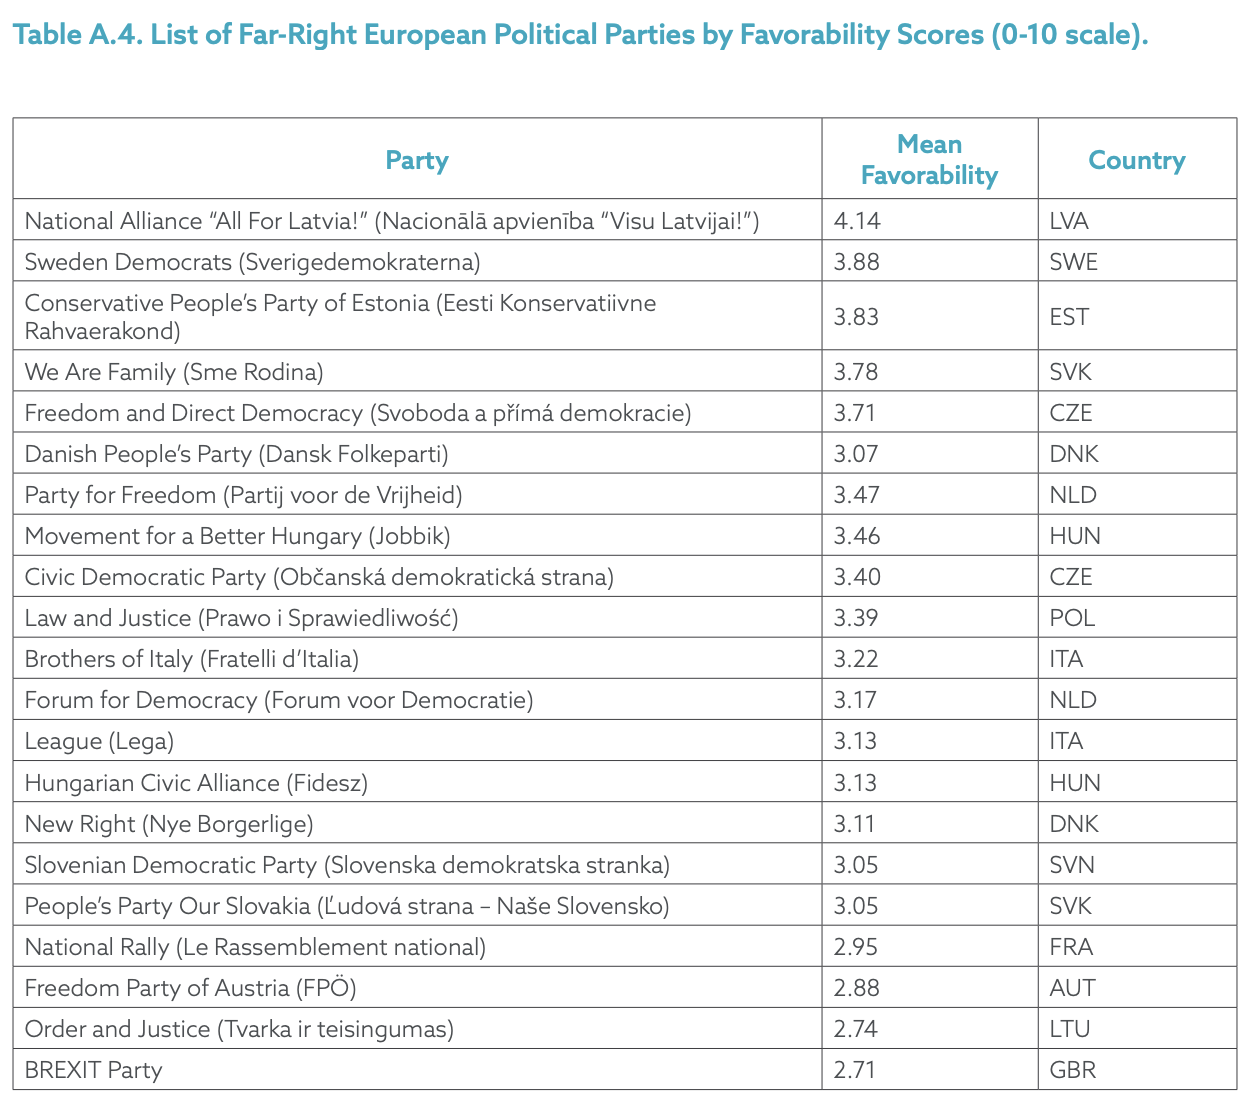 Table A.4. List of Far-Right European Political Parties by Favorability Scores (0-10 scale).